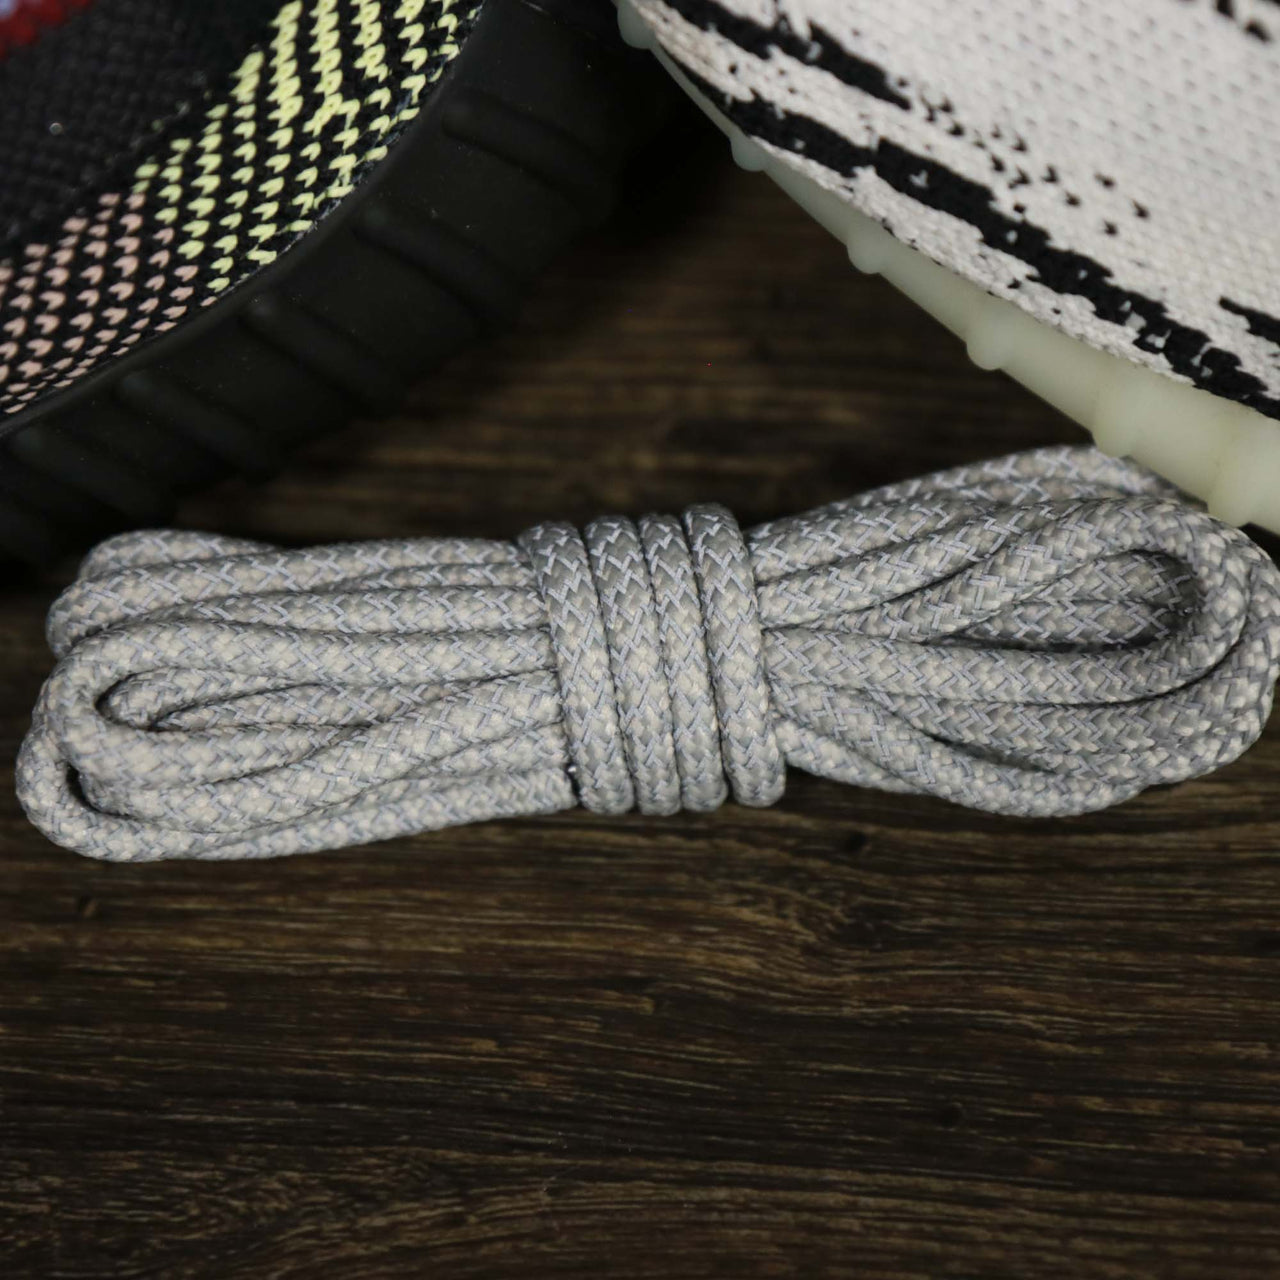 The 3M Reflective White/Gravel Solid Shoelaces with White/Gravel Aglets | 120cm Capswag reflecting